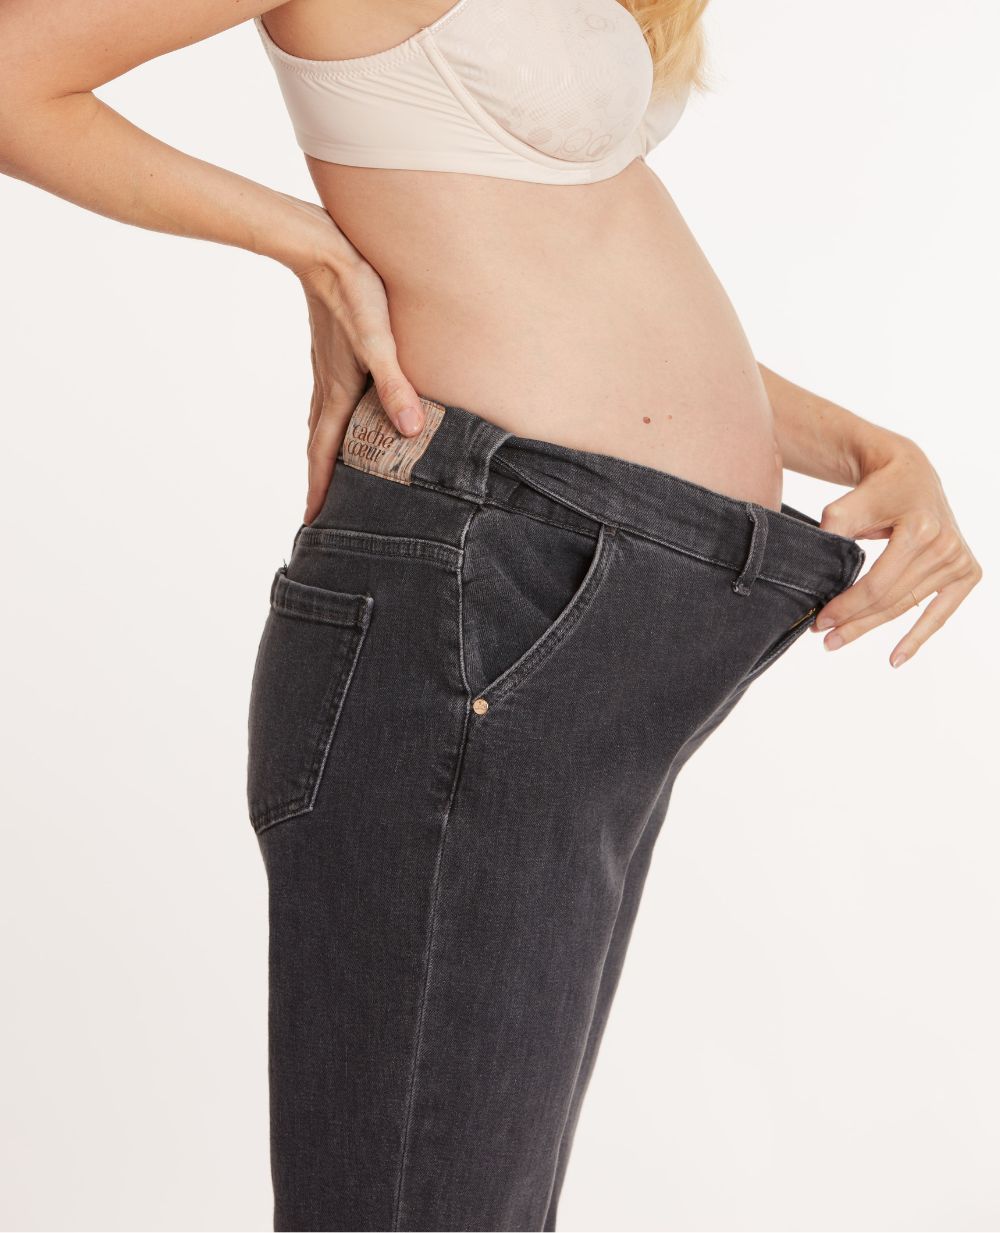 Carrie maternity jeans MOM FIT grey used